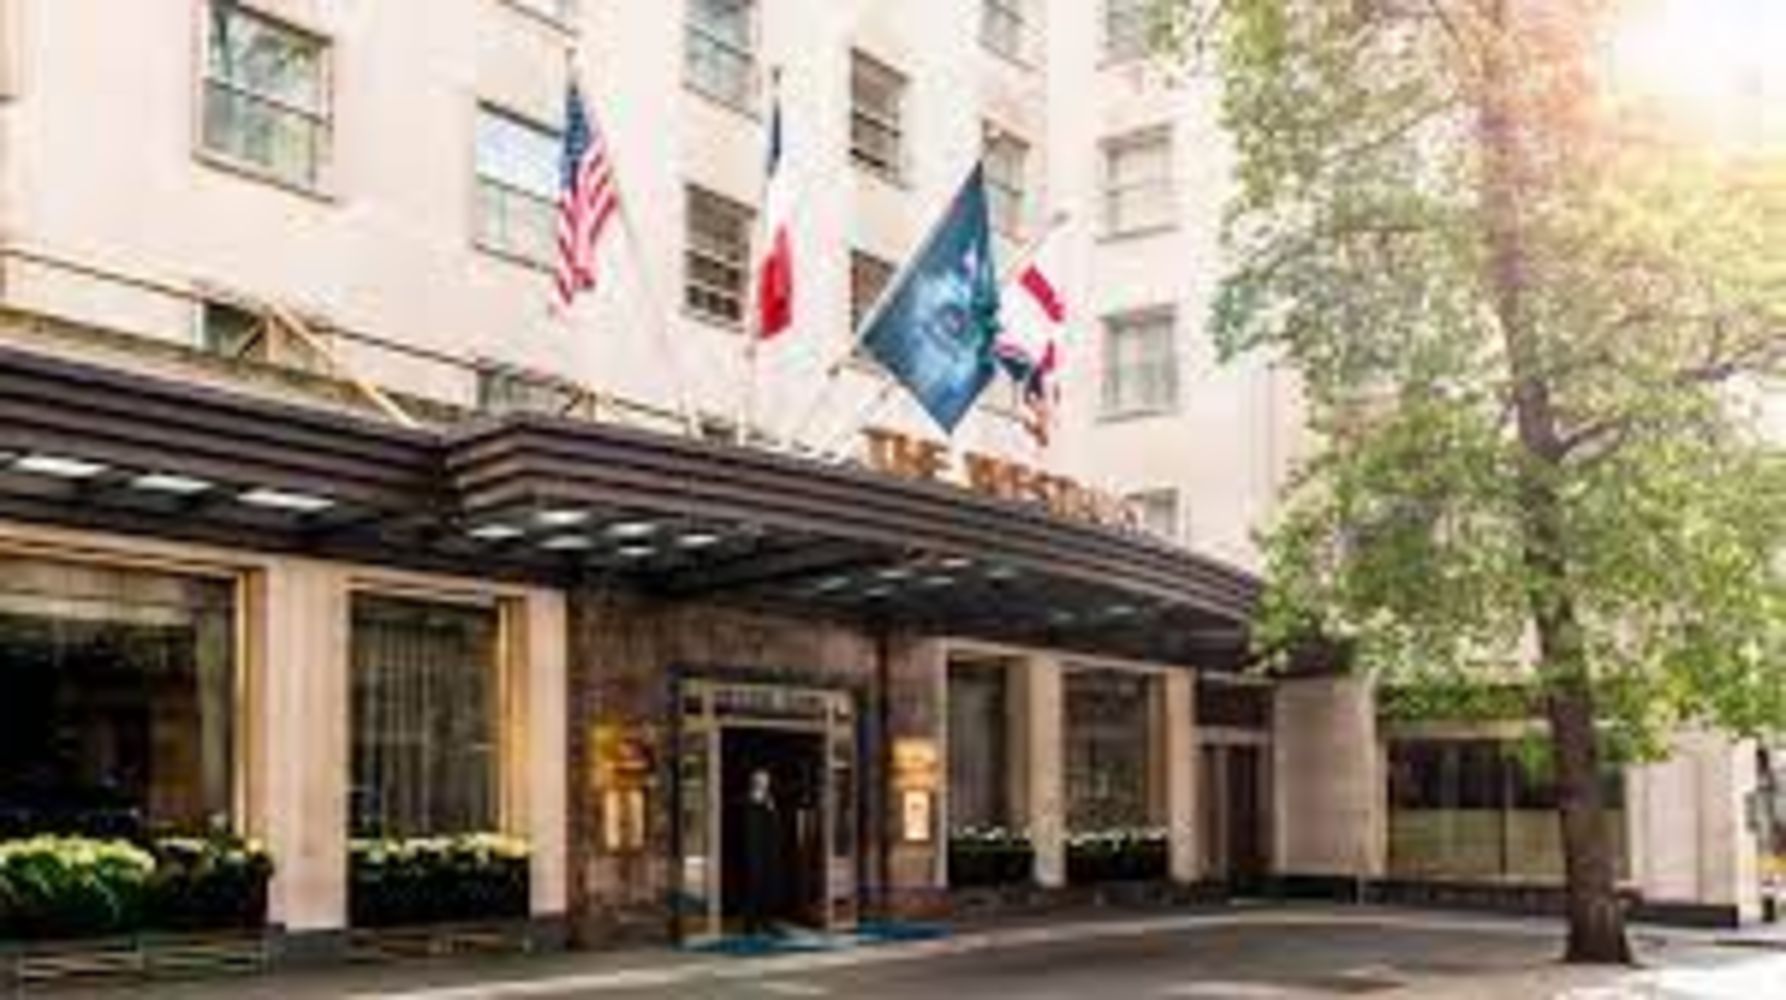 The Westbury Hotel Mayfair Entire Contents of Iconic 5 Star Hotel Public Areas, Kitchens , Bars & Restaurants & Wine Wet Stock